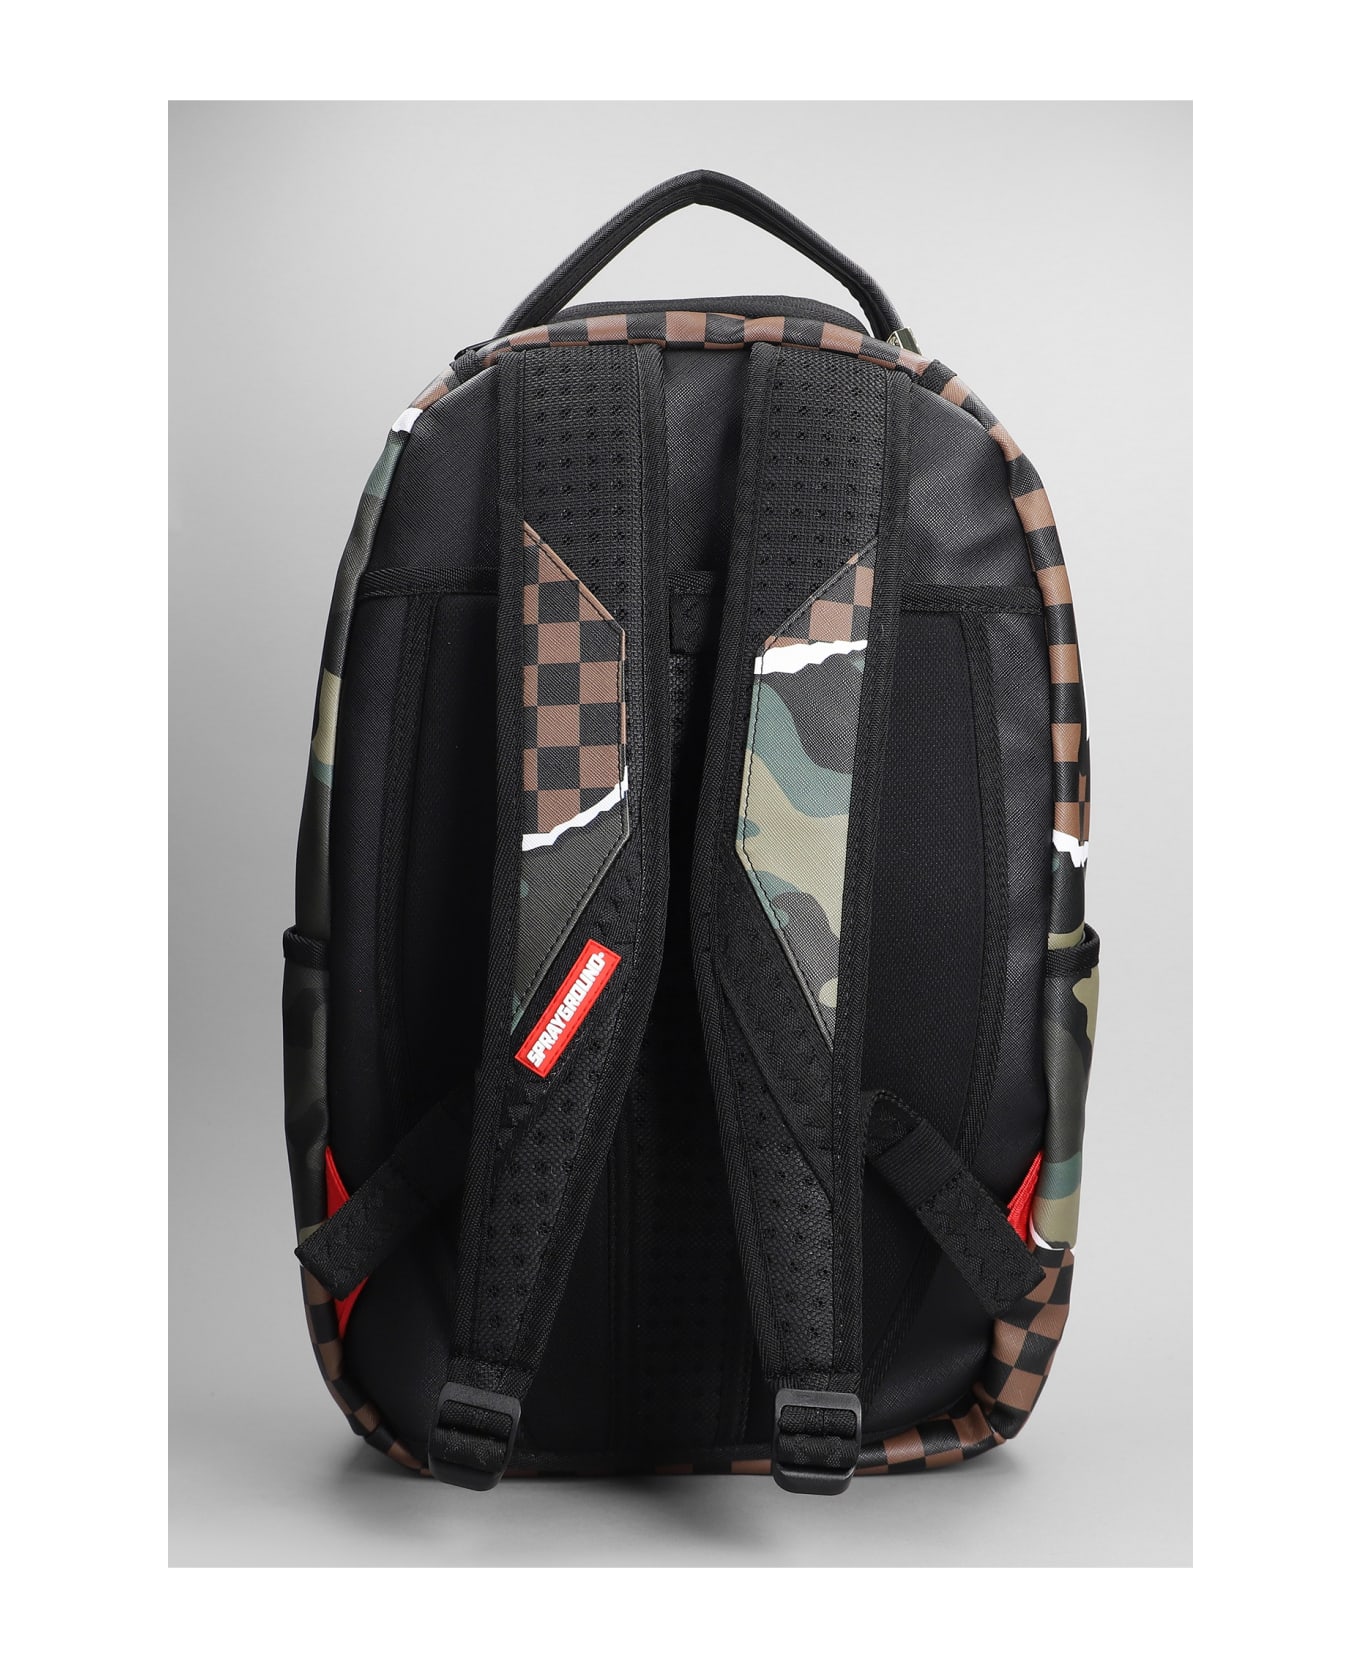 Sprayground Backpack In Brown Pvc - Marrone バックパック